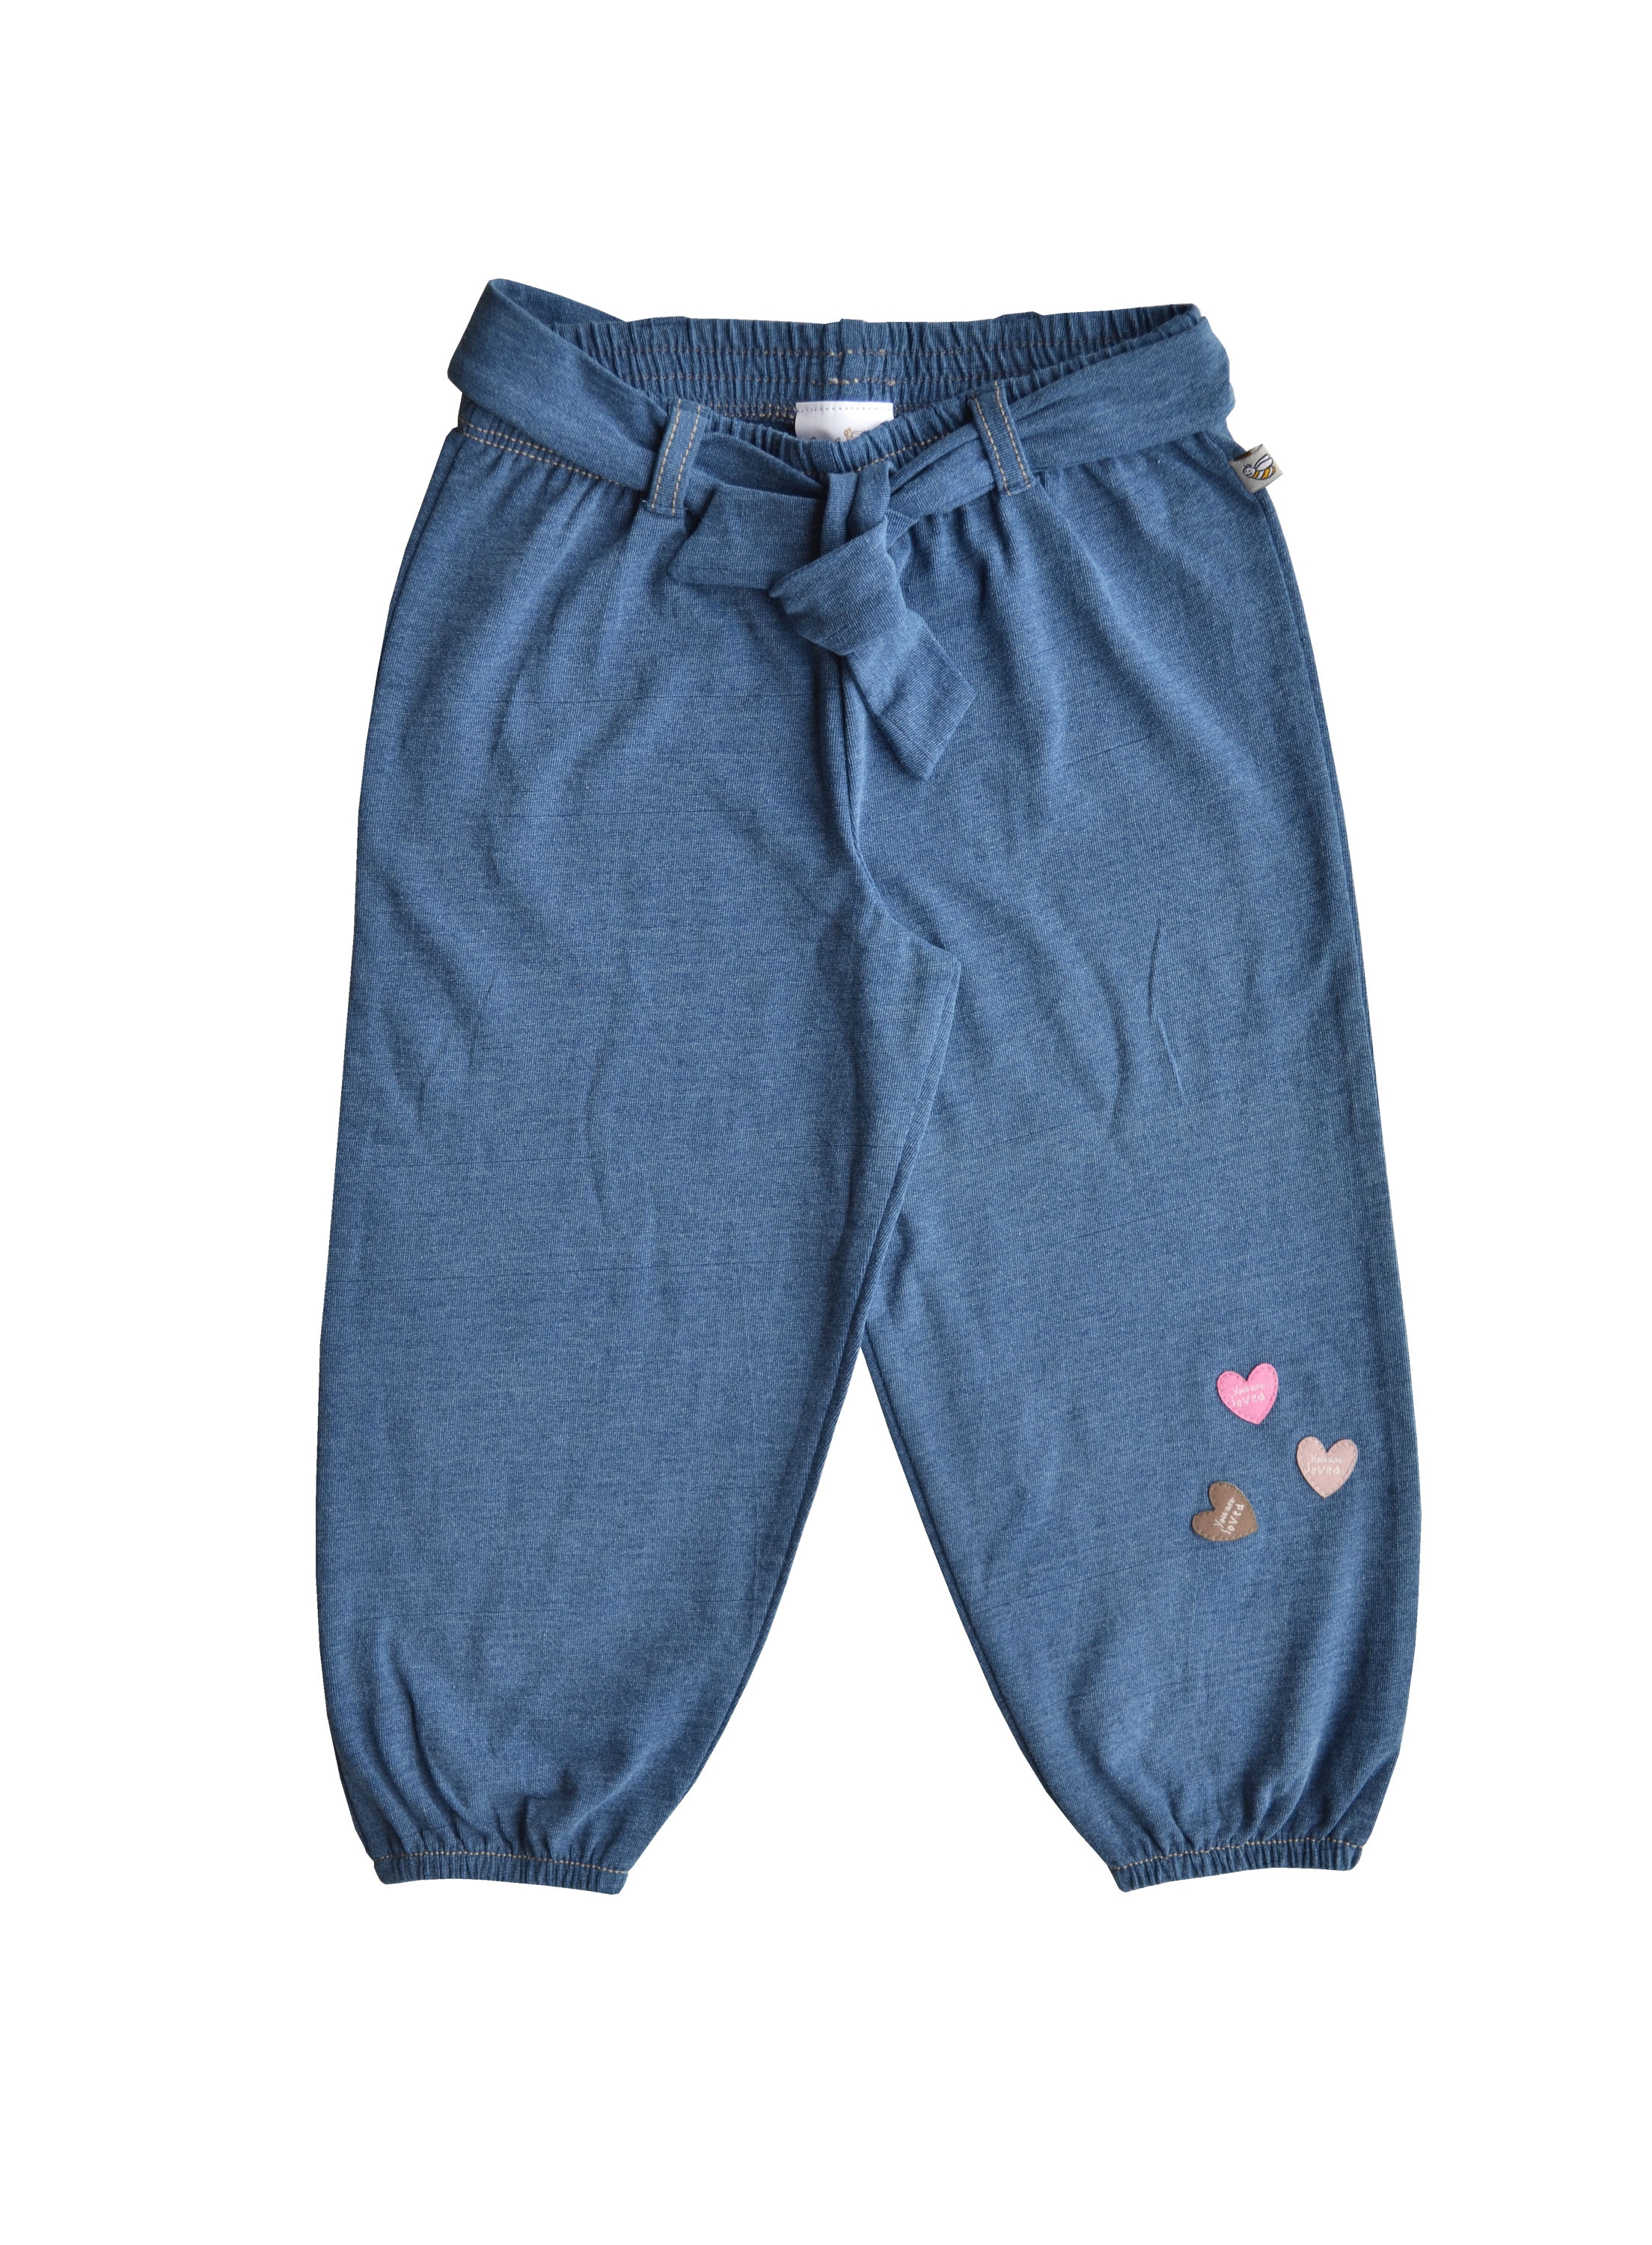 Baby Girl Denim Pant with Belt and Applique (90% Cotton 5% Elasthan)